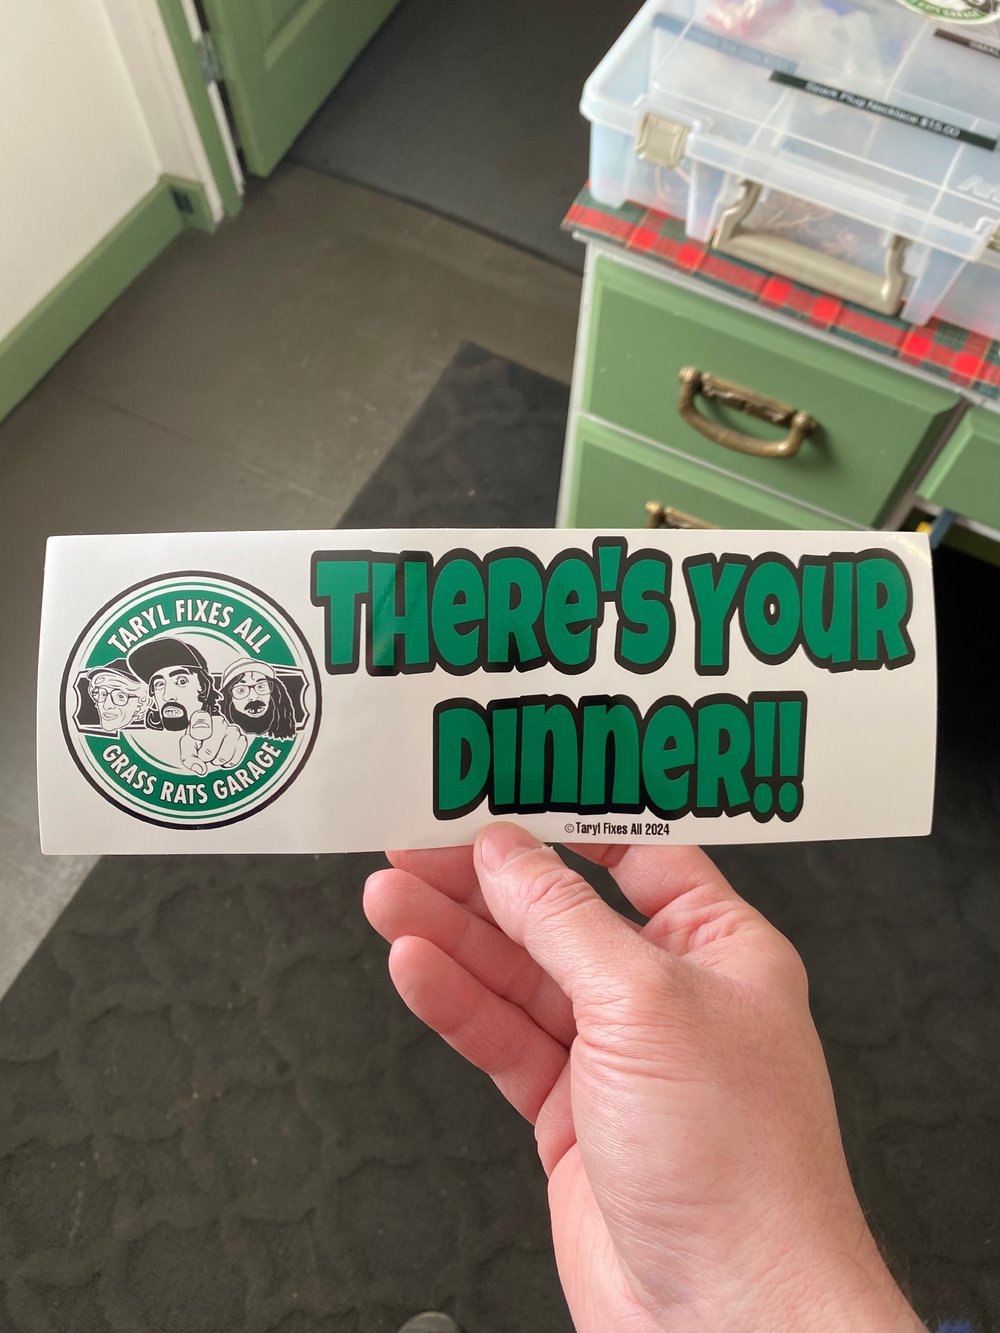 GIANT "Theres Your Dinner" Bumper Stickers!! (FREE USA SHIPPING 🇺🇸)